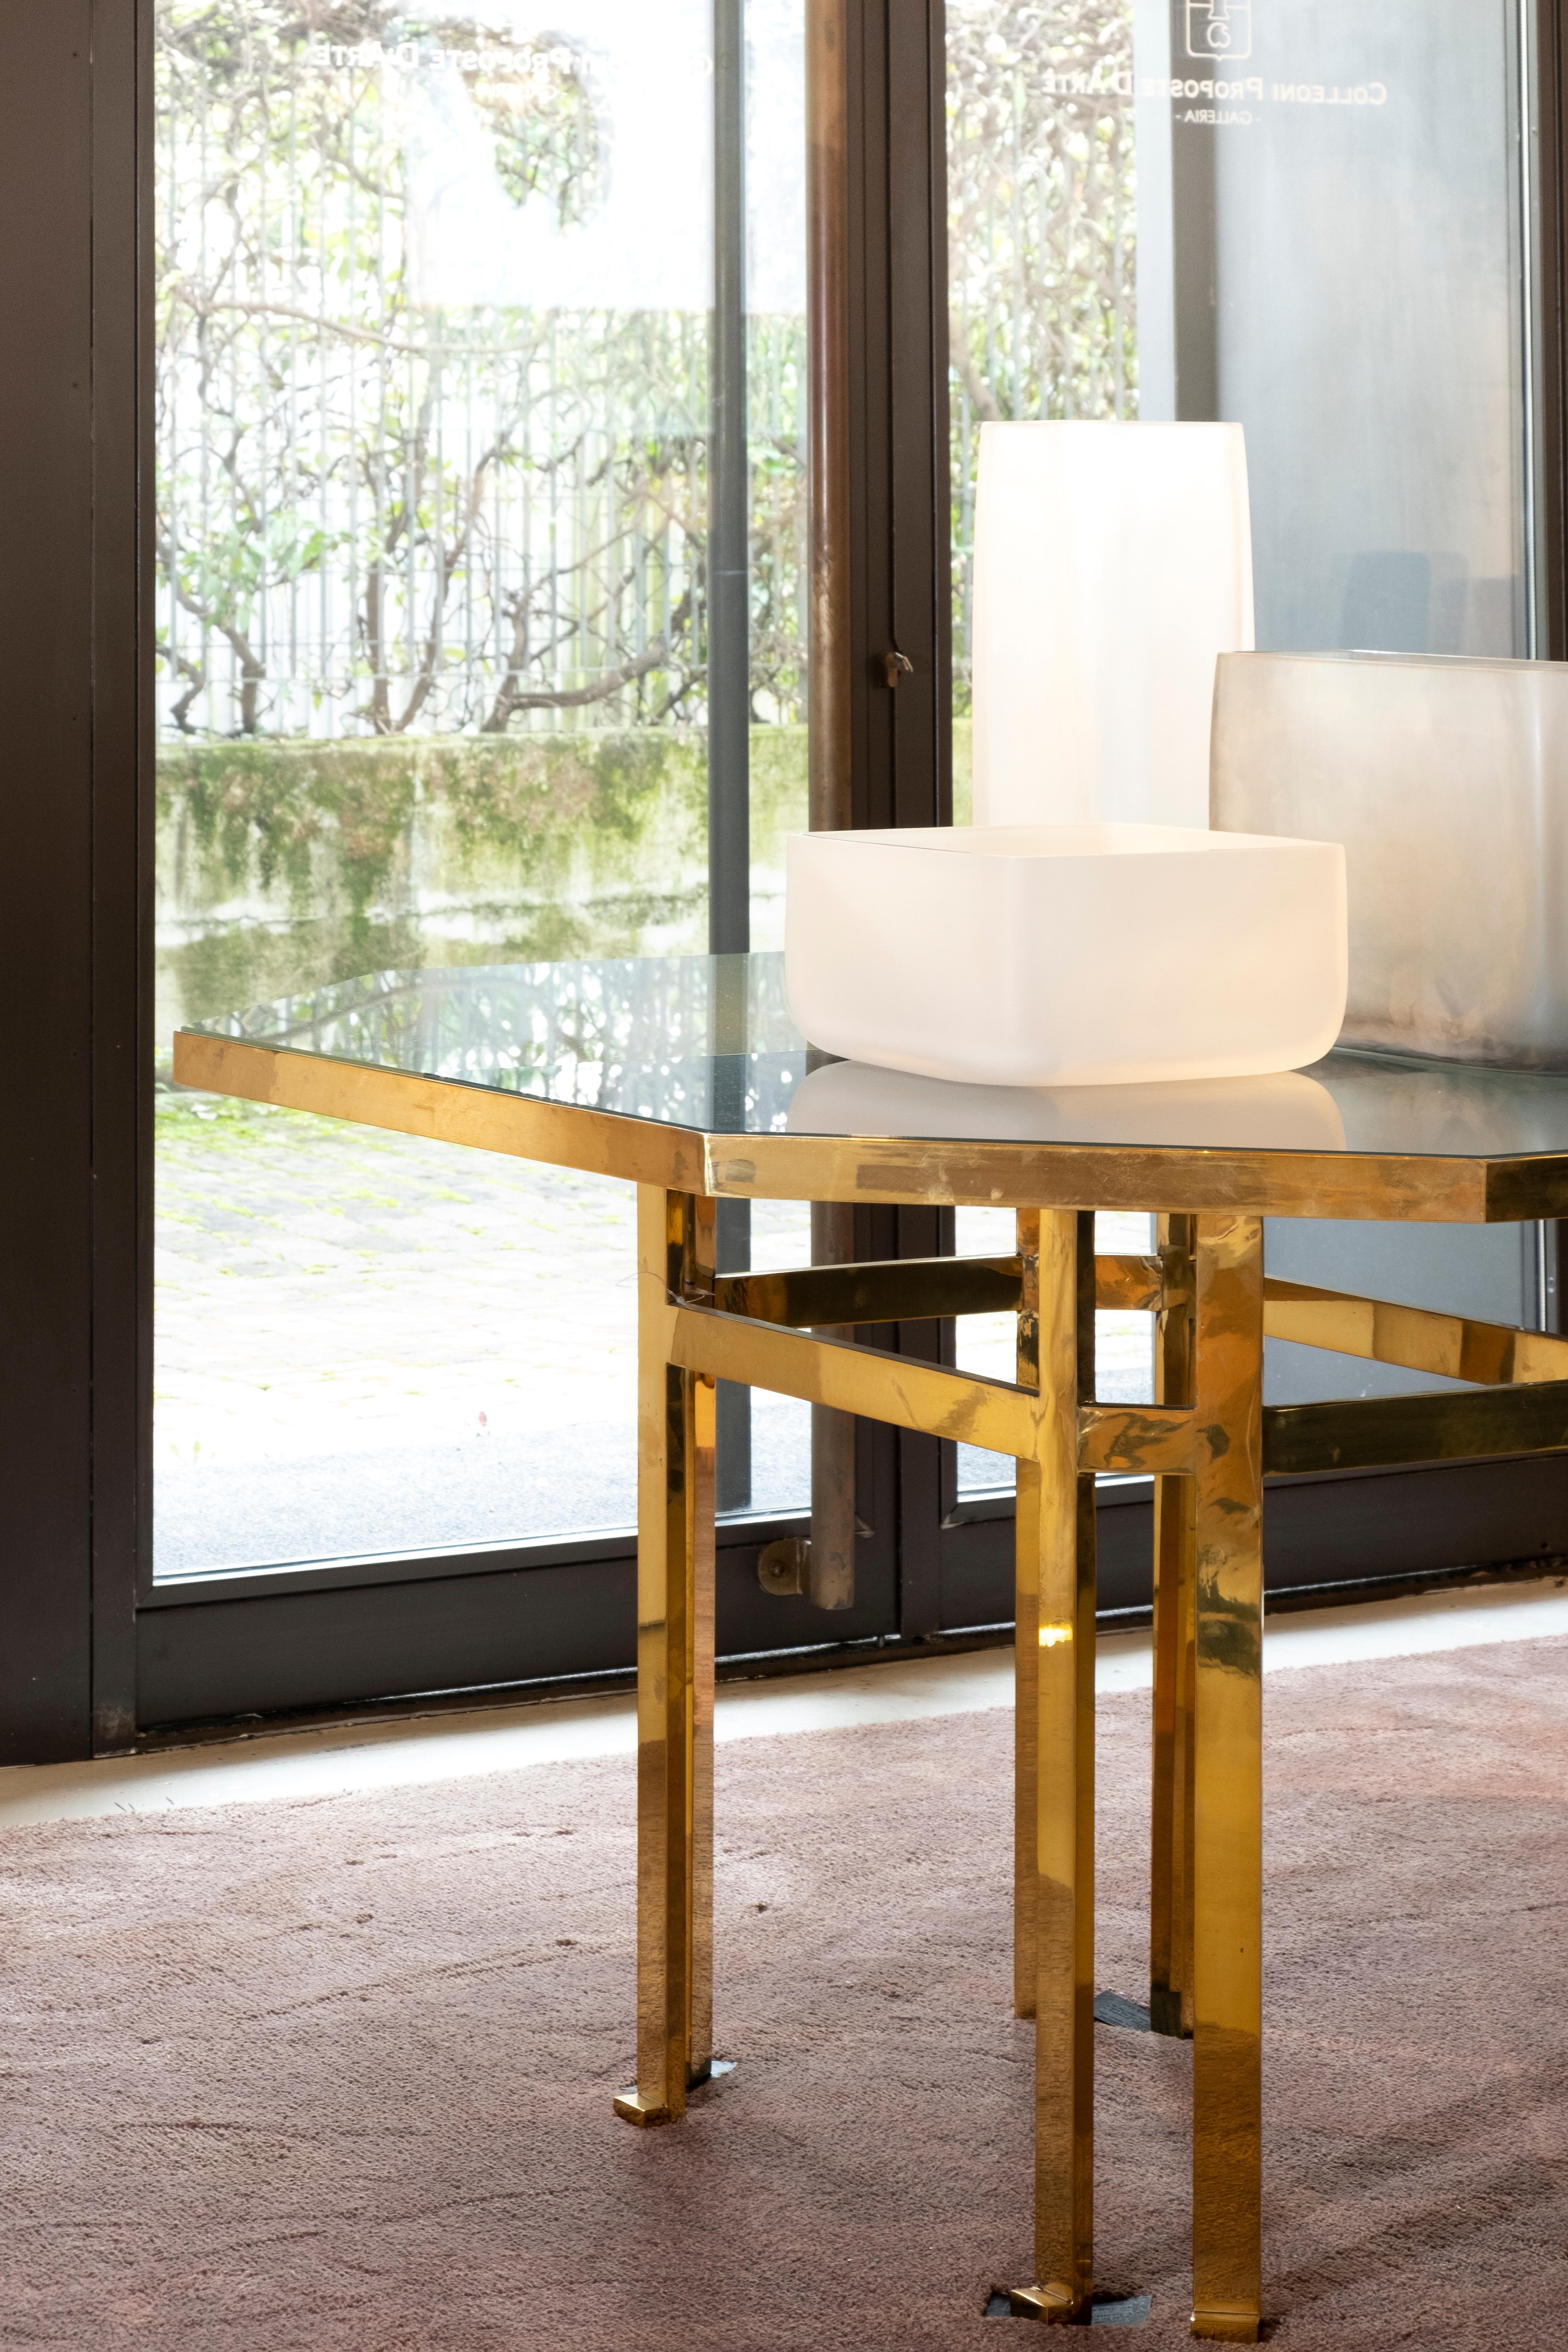 21st century Filippo Feroldi brass table 130 back-colored glass top various colors
designed by Filippo Feroldi for Purho and Colleoni Arte, Holo 130 is characterized by small dimensions and by an octagonal brass structure surmounted by a sheet of